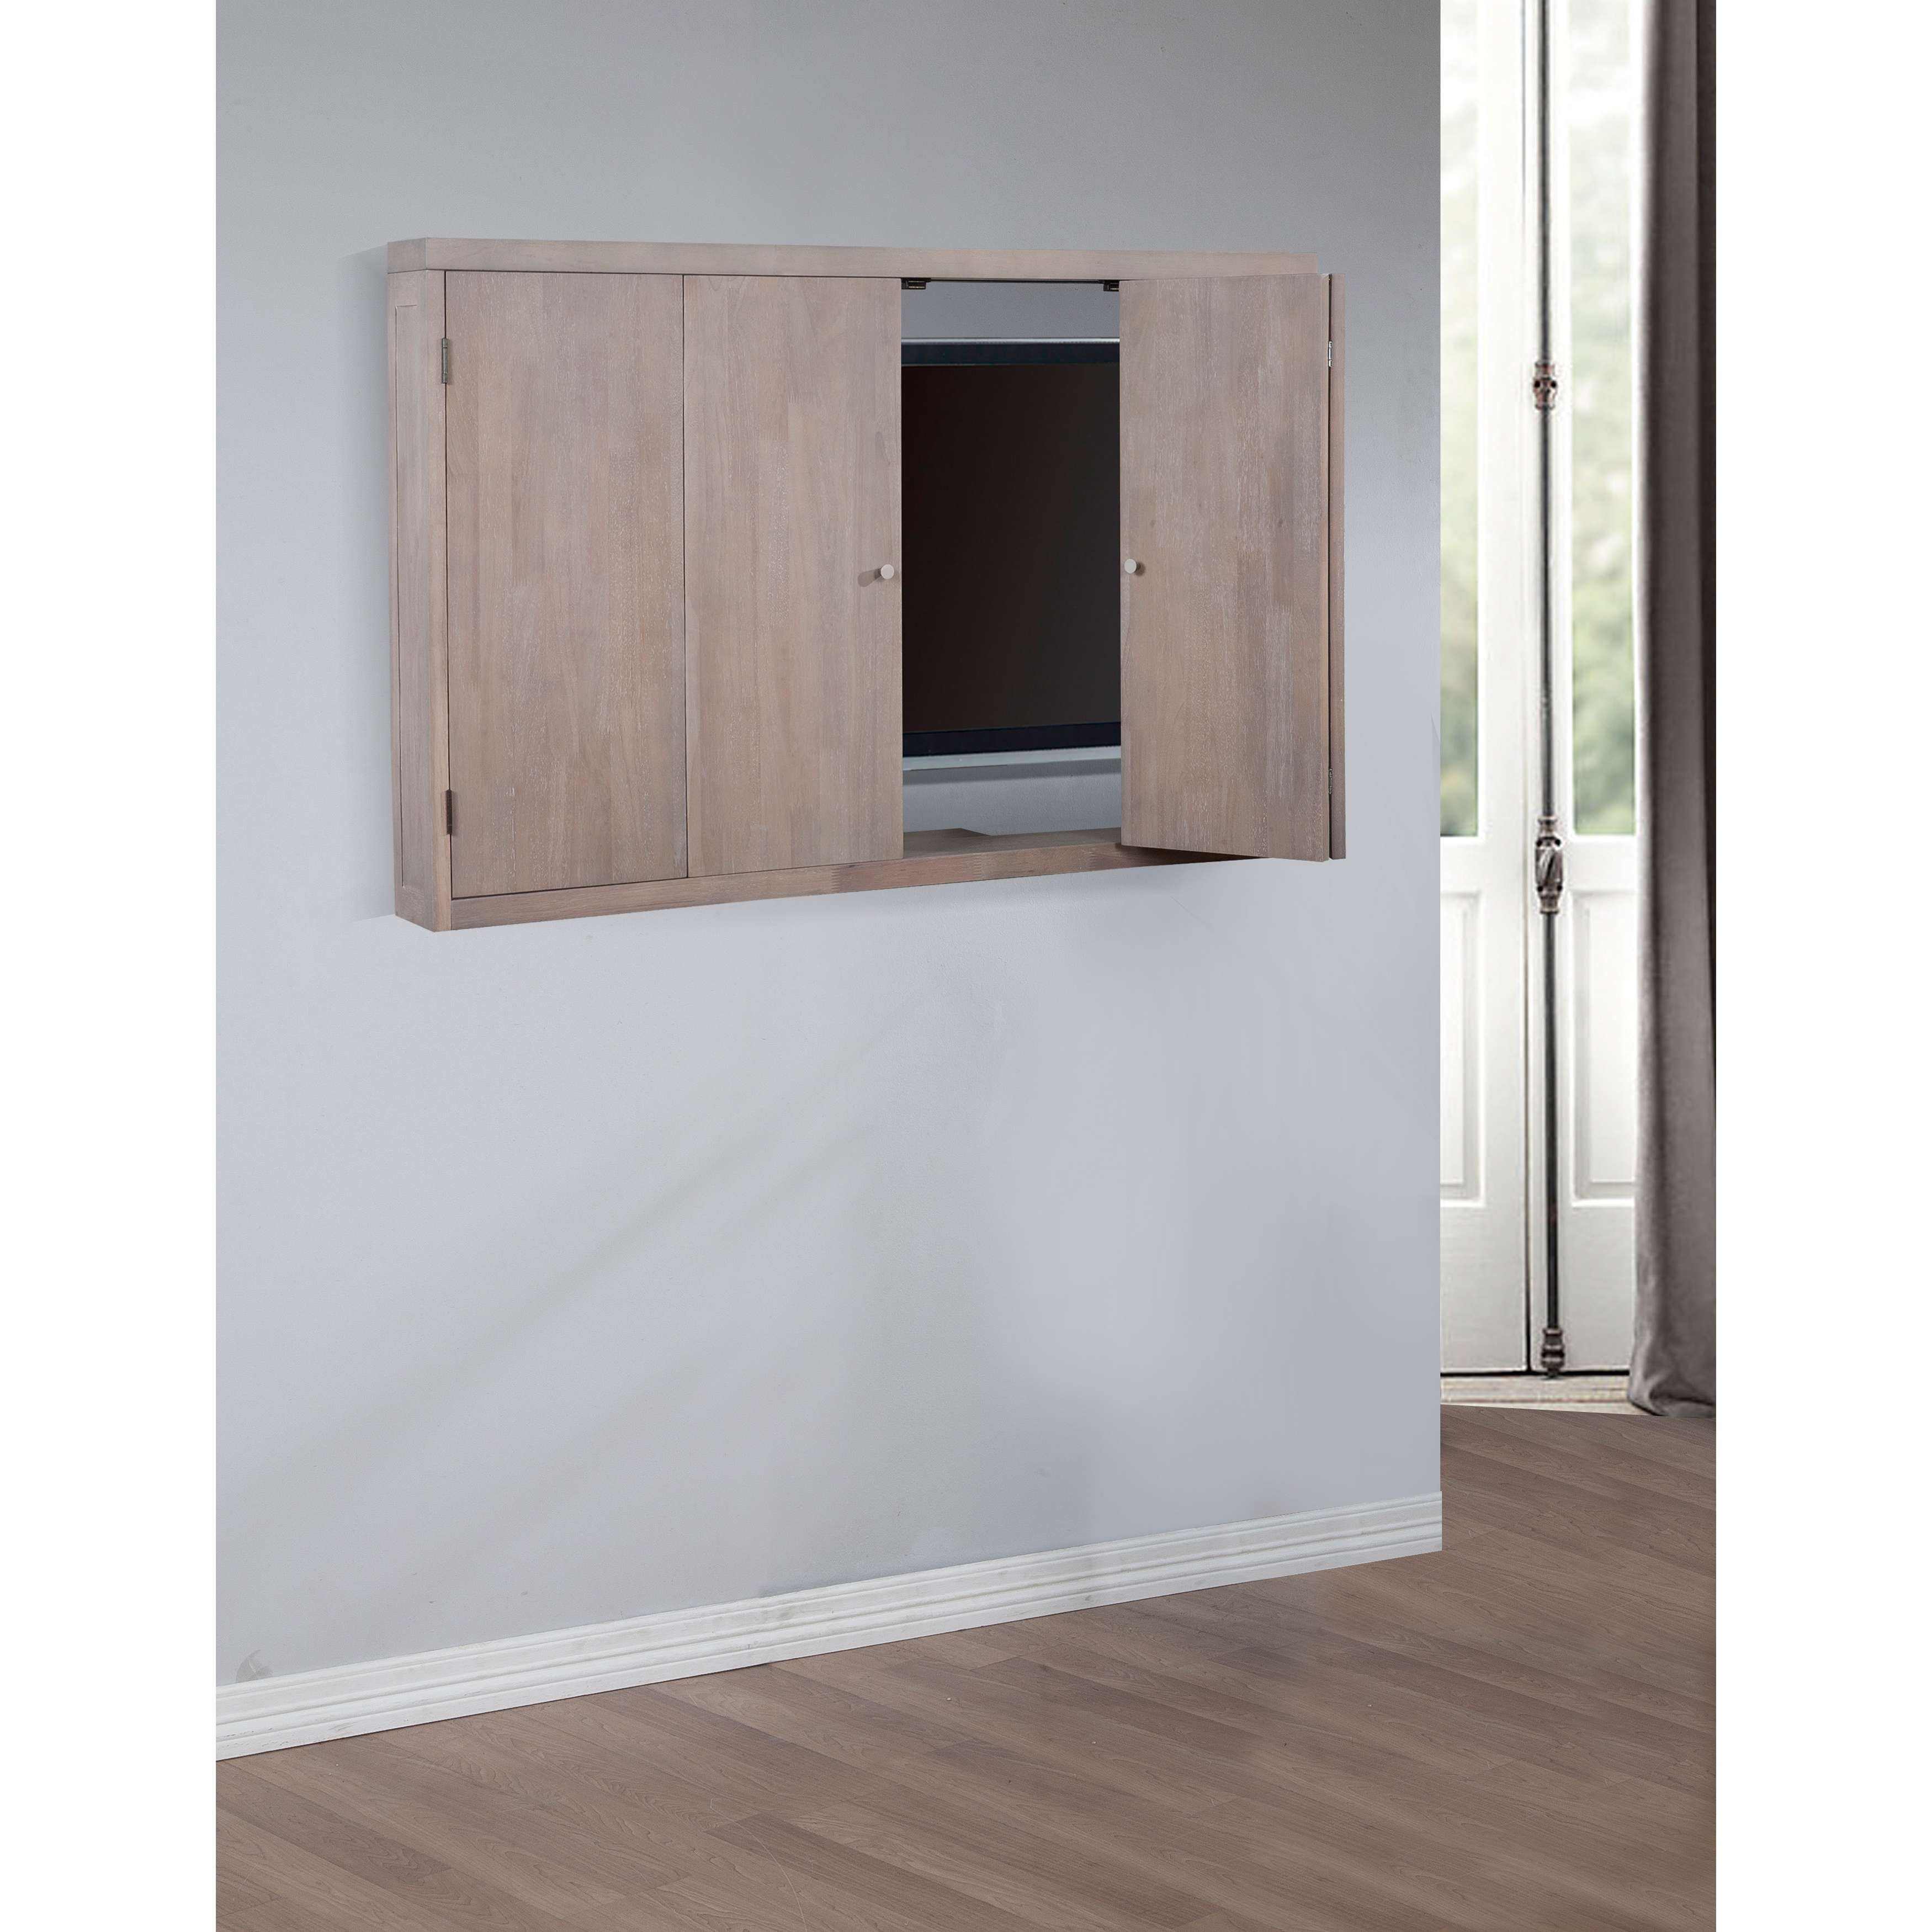 Outstanding Wall Mounted Tv Cabinet With Doors Impressive Ideas Inside Wall Mounted Tv Cabinets For Flat Screens With Doors (View 15 of 20)